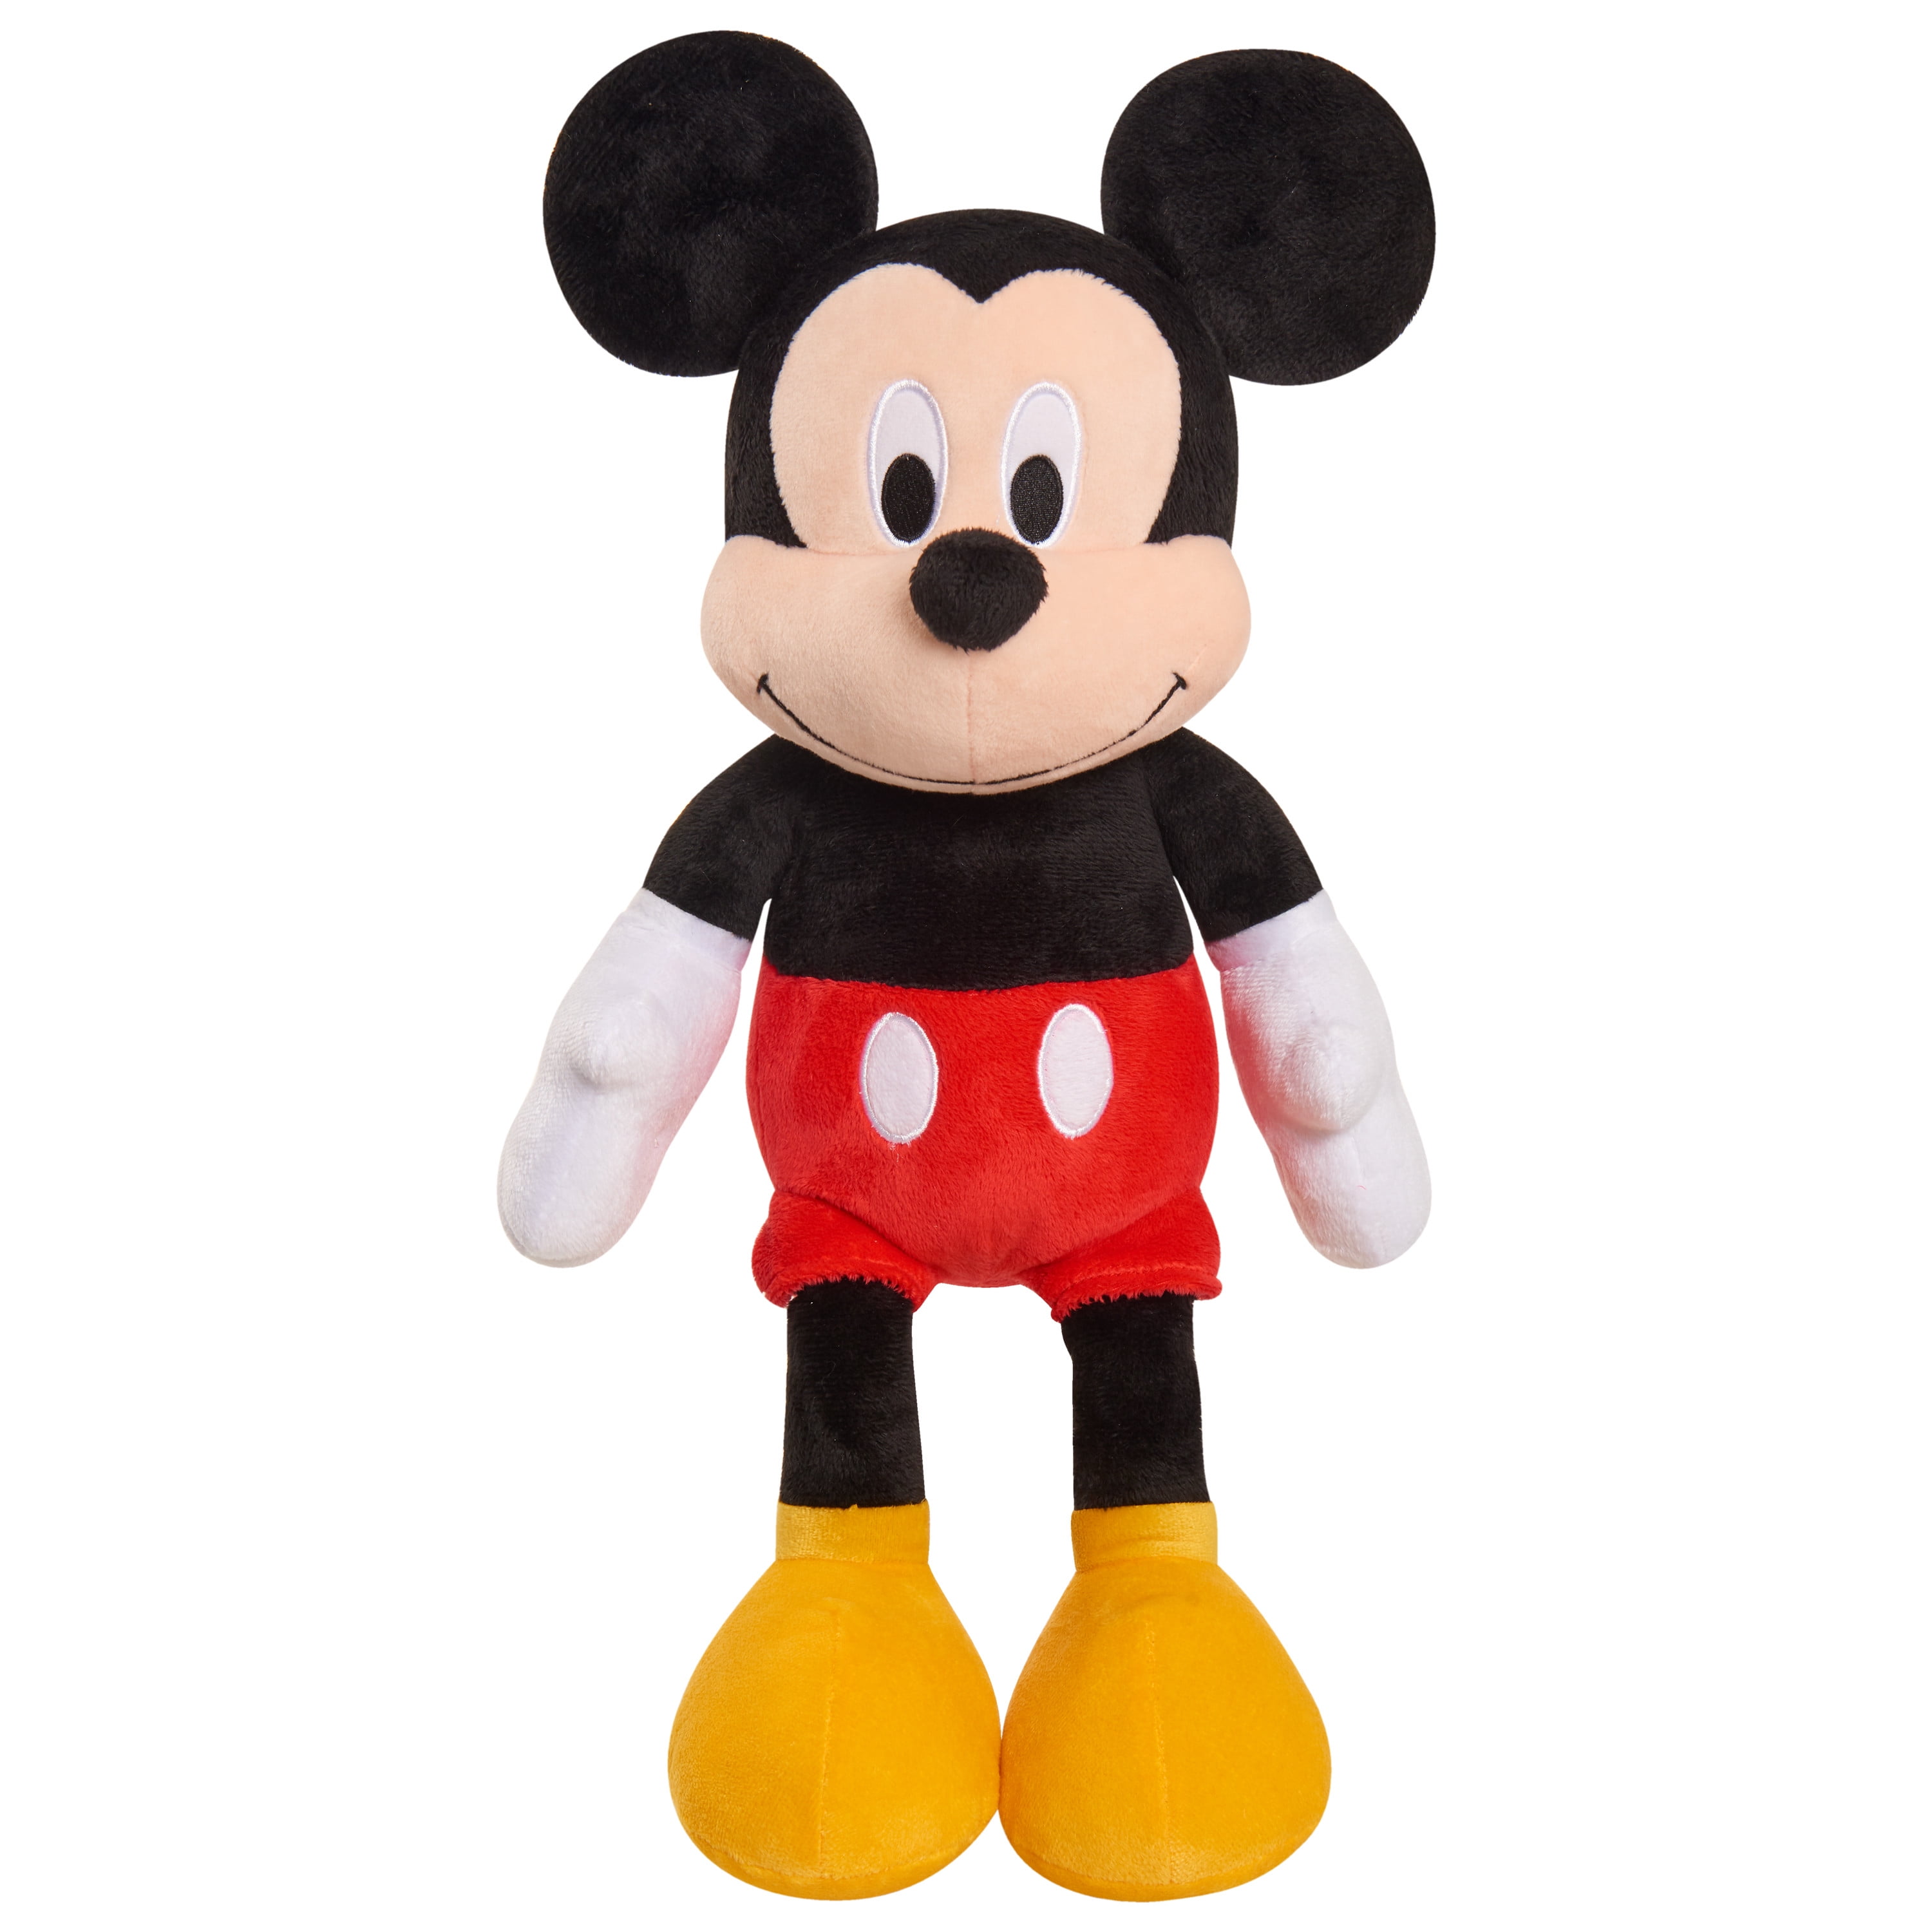 DISNEY Store Exclusive 19" MICKEY MOUSE LARGE Plush Toy Doll Authentic NWT